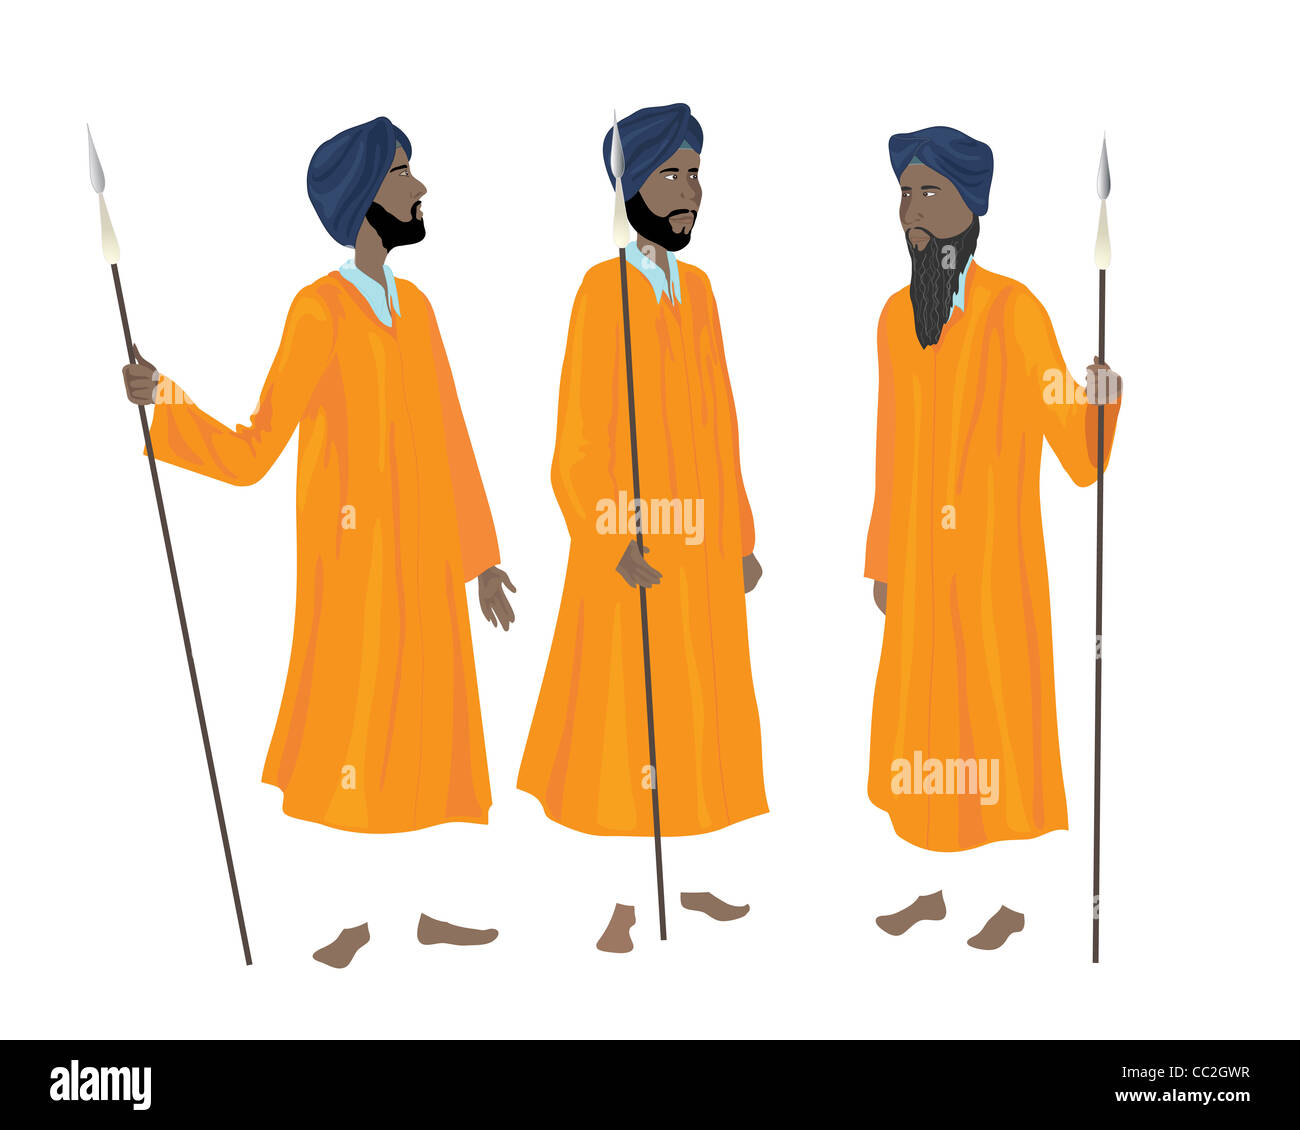 an illustration of three sikh men in the traditional uniform of the guards of the golden temple at amritsar Stock Photo